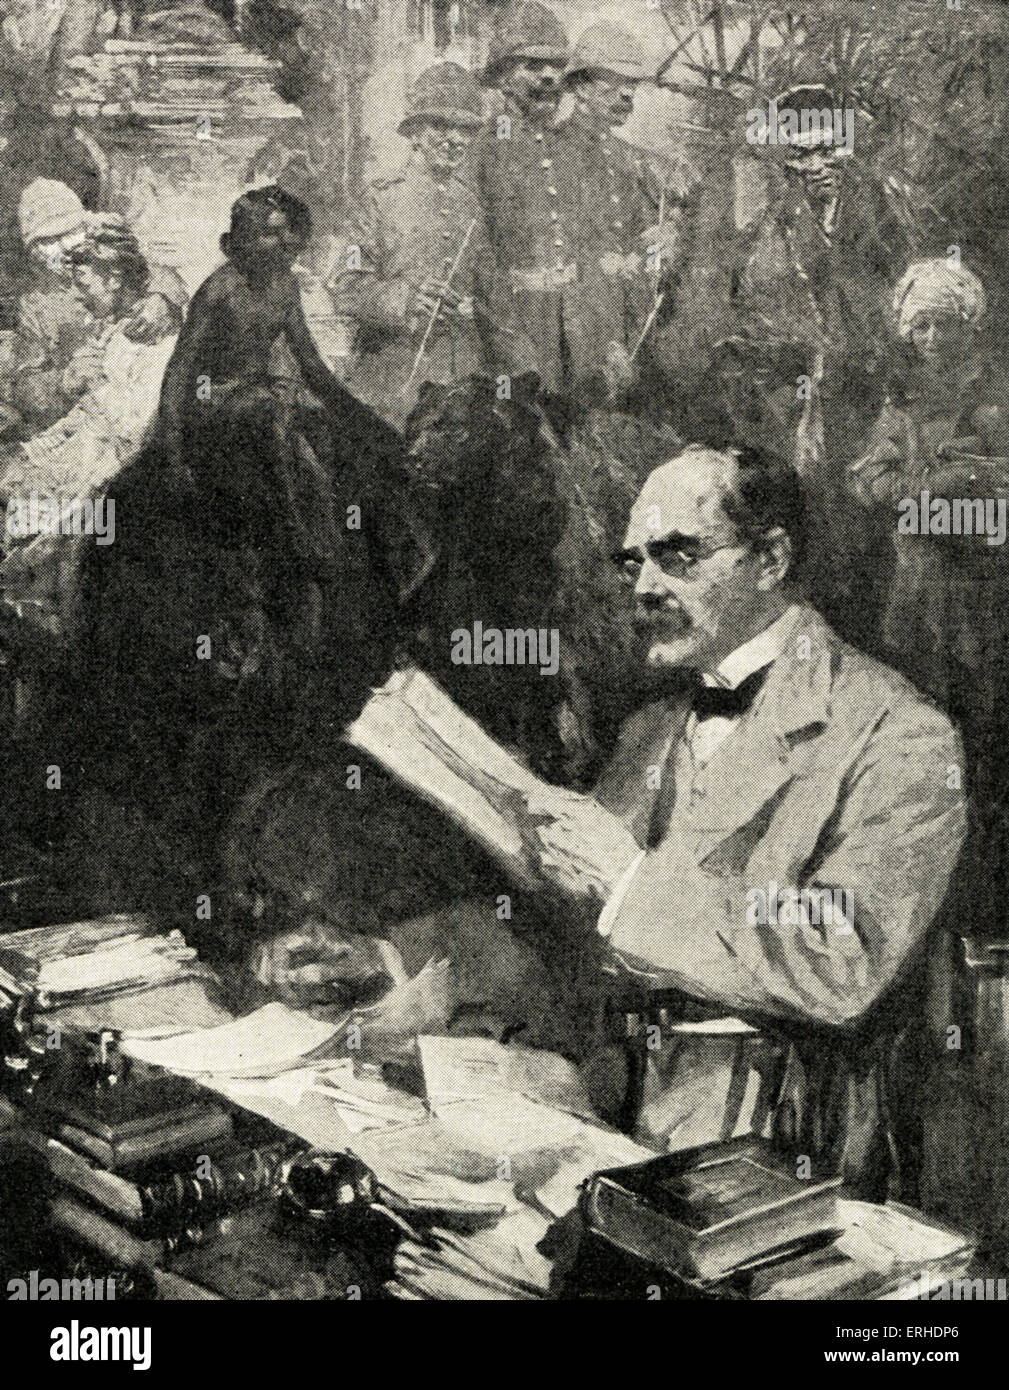 Rudyard Kipling - portrait with glasses, reading a manuscript, surrounded by his creations (Mowgli, Baloo the bear, Bagheera the panther, etc) after a drawing by Cyrus Cuneo. English poet and novelist. 30 December 1865 (in Mumbai ) - January 1936. Stock Photo